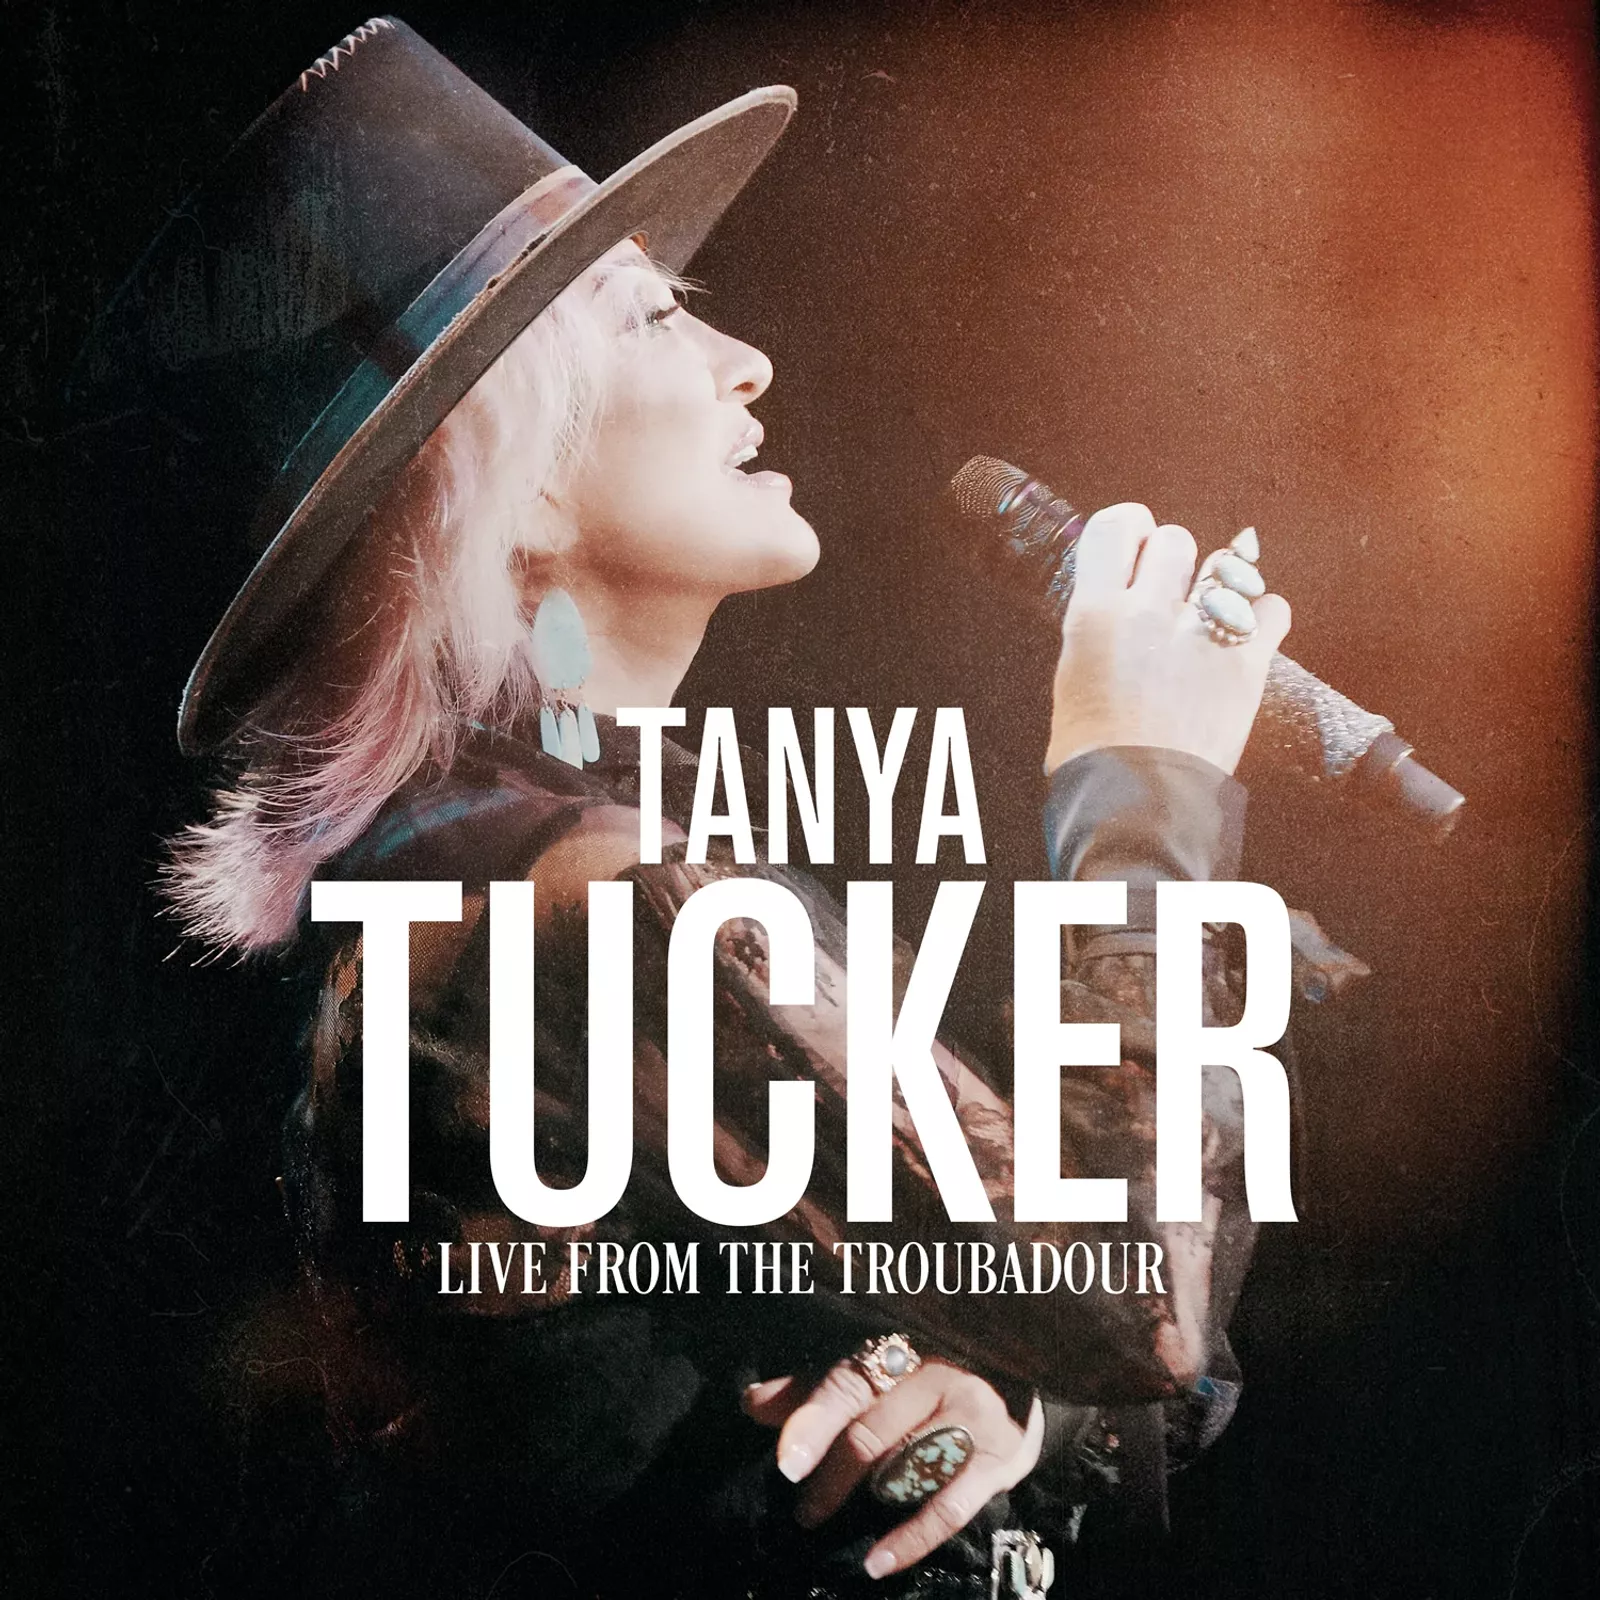 Live From the Troubadour by Tanya Tucker